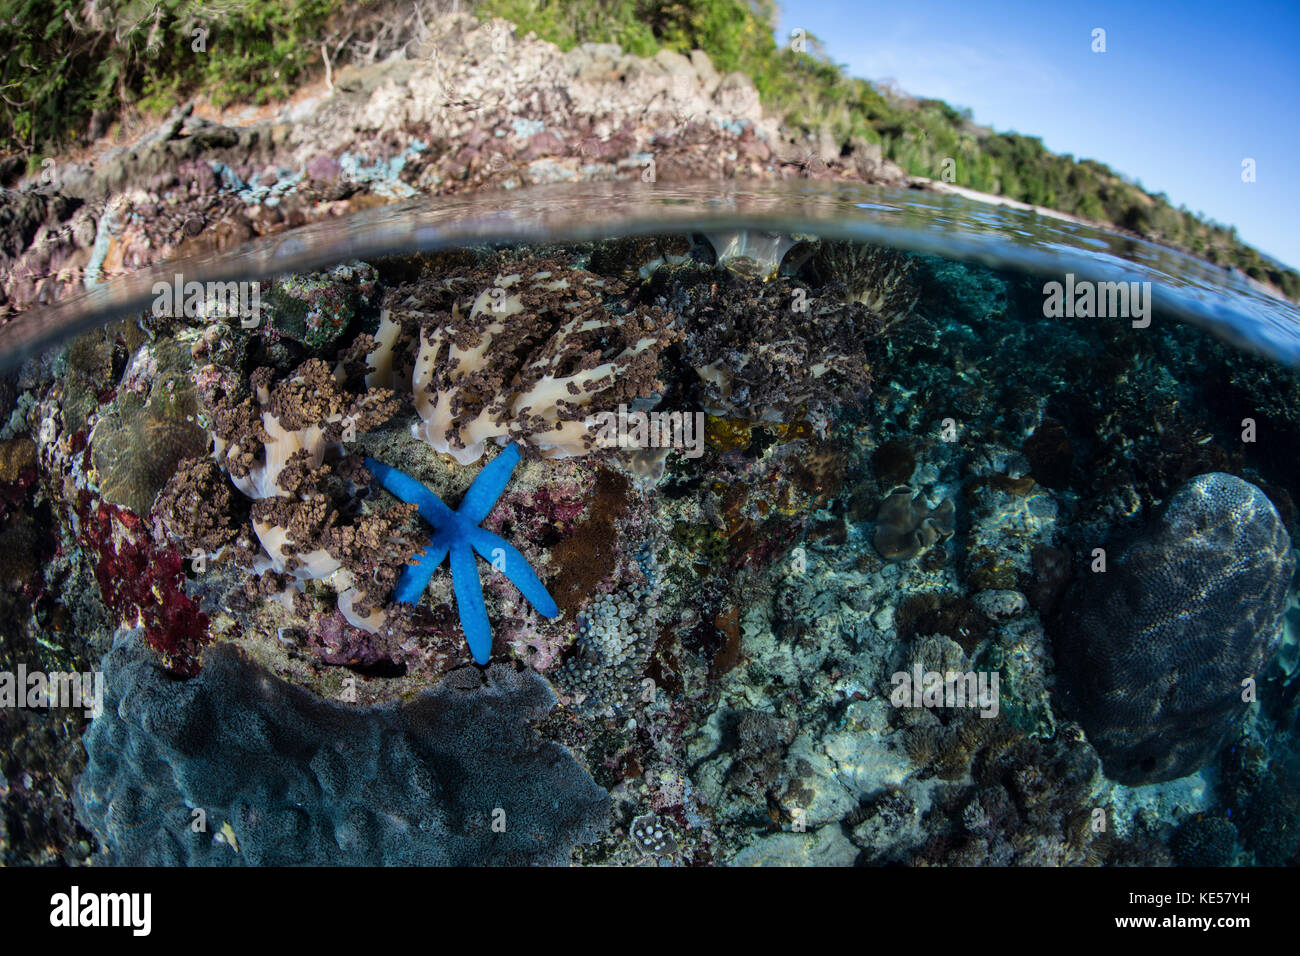 A blue starfish clings to a shallow coral reef in the Lesser Sunda Islands of Indonesia. Stock Photo